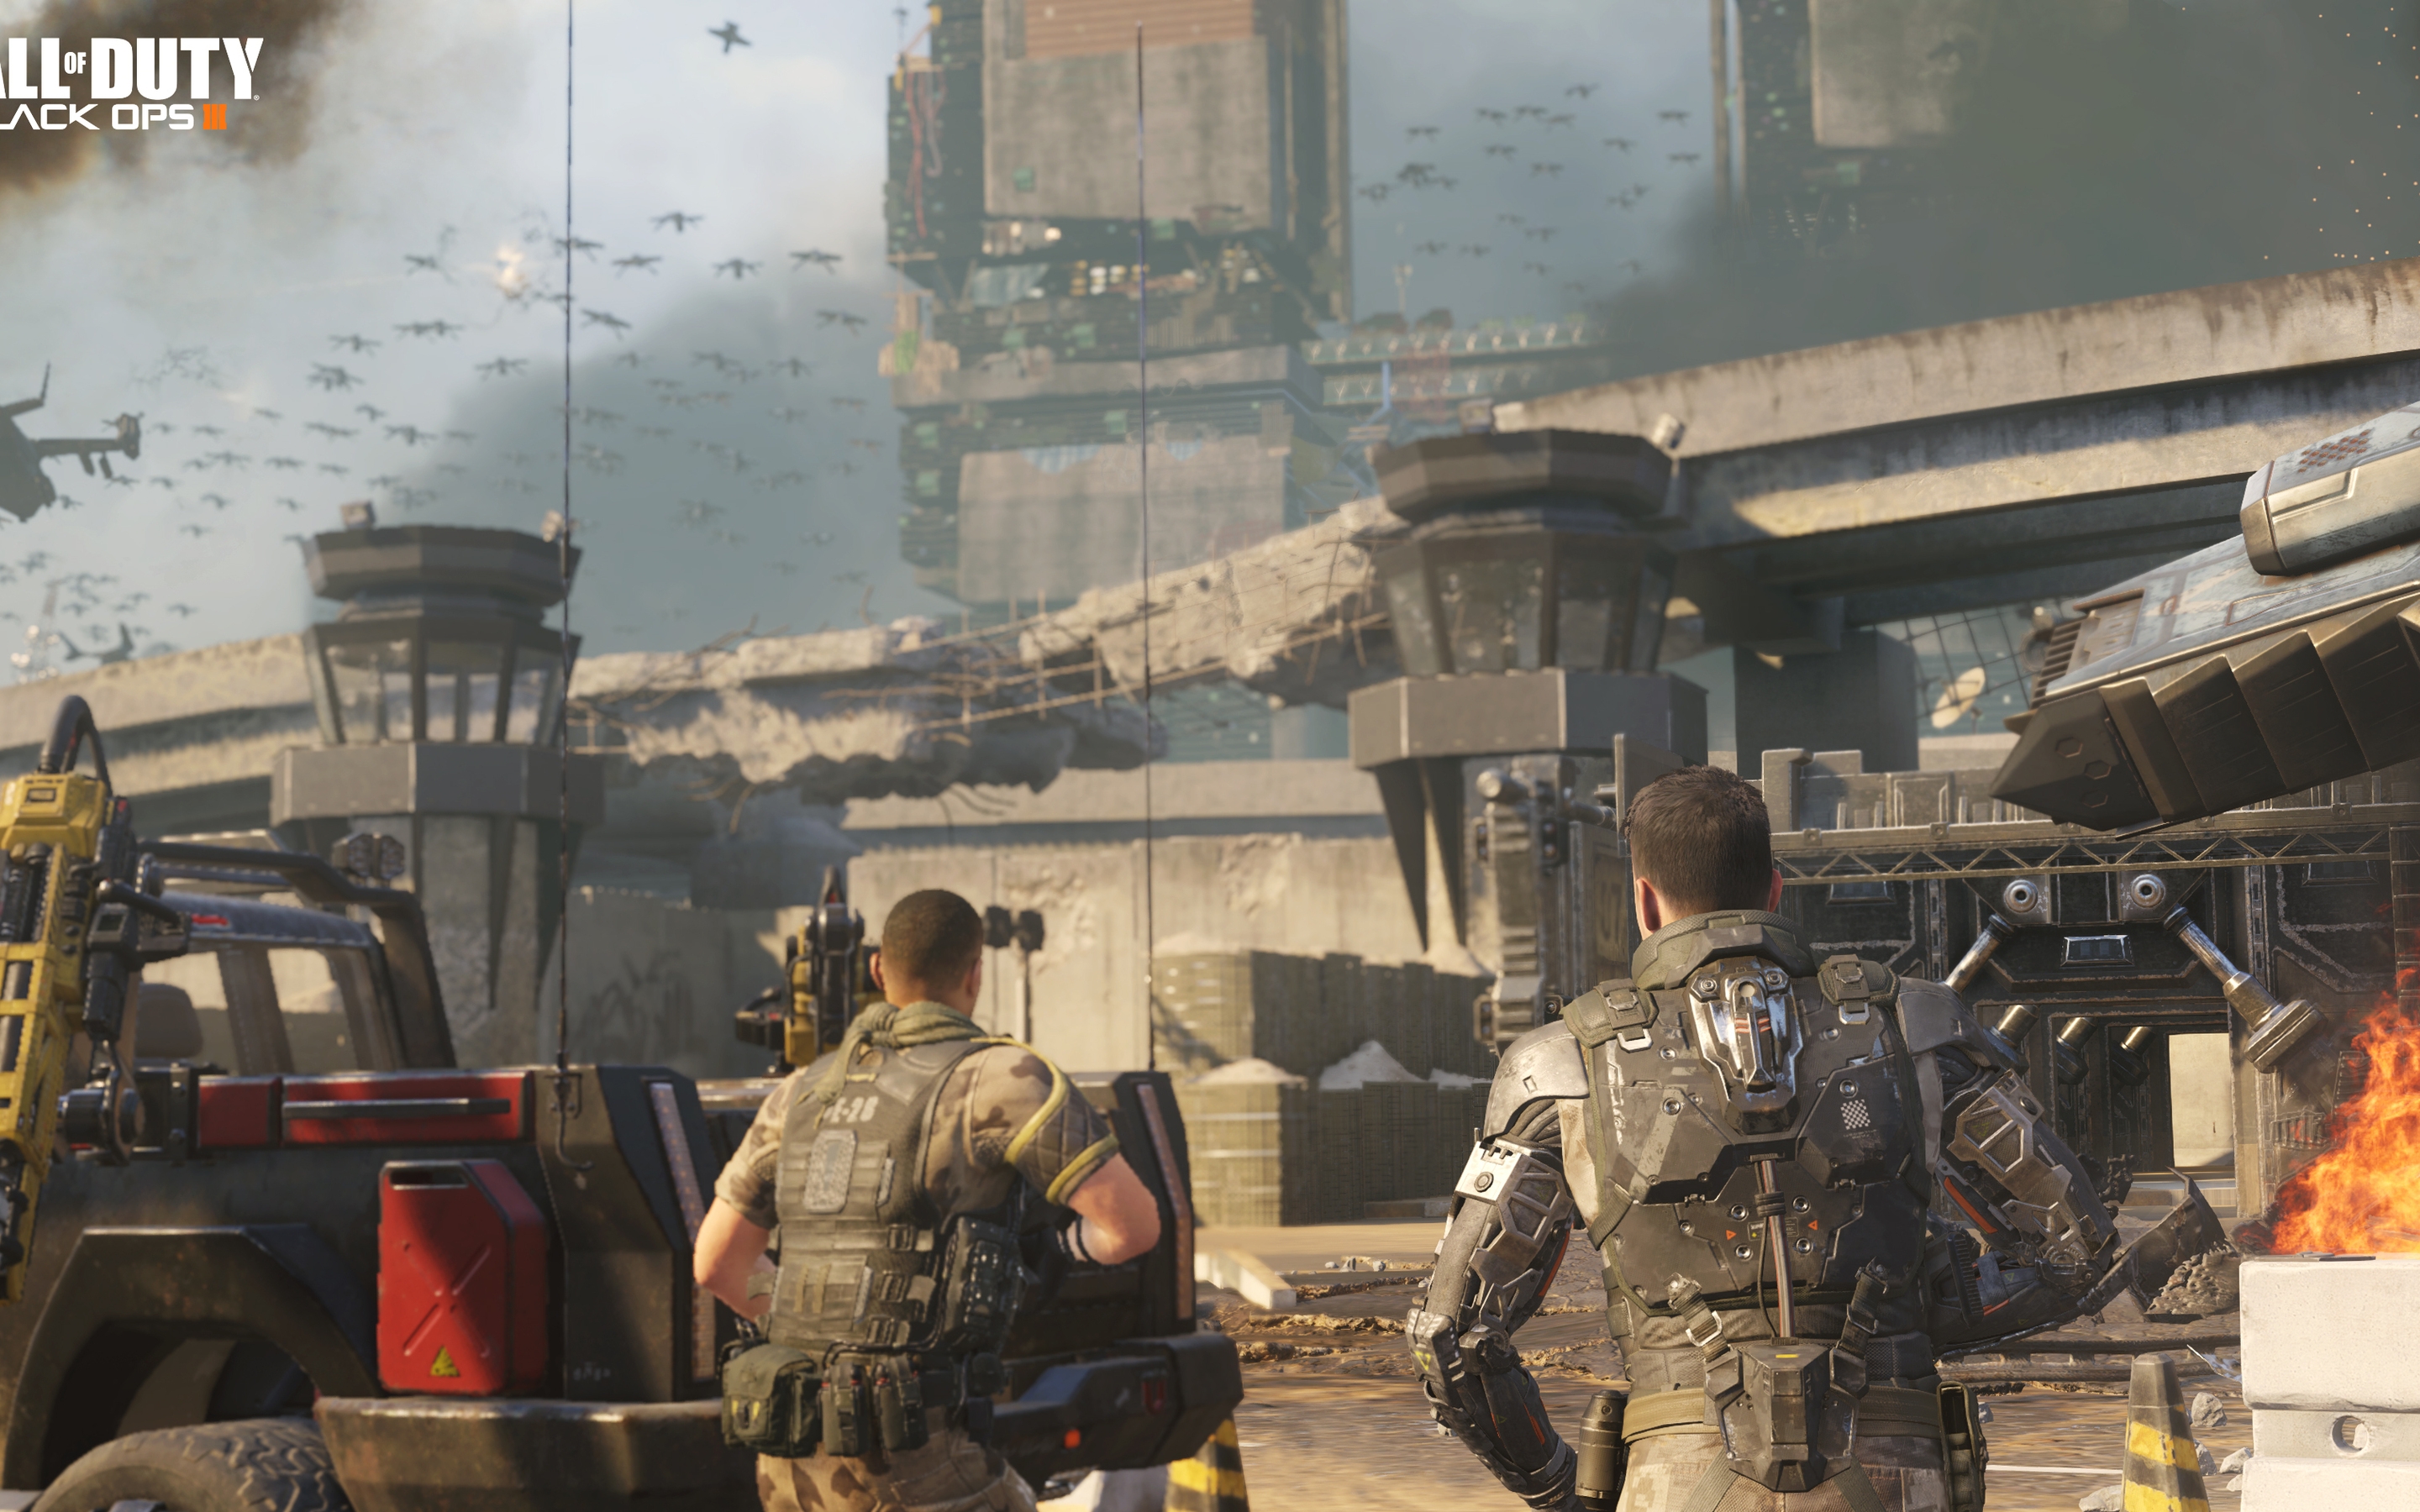 Call of Duty Black Ops 3 Ramses Station Under Siege for 2880 x 1800 Retina Display resolution